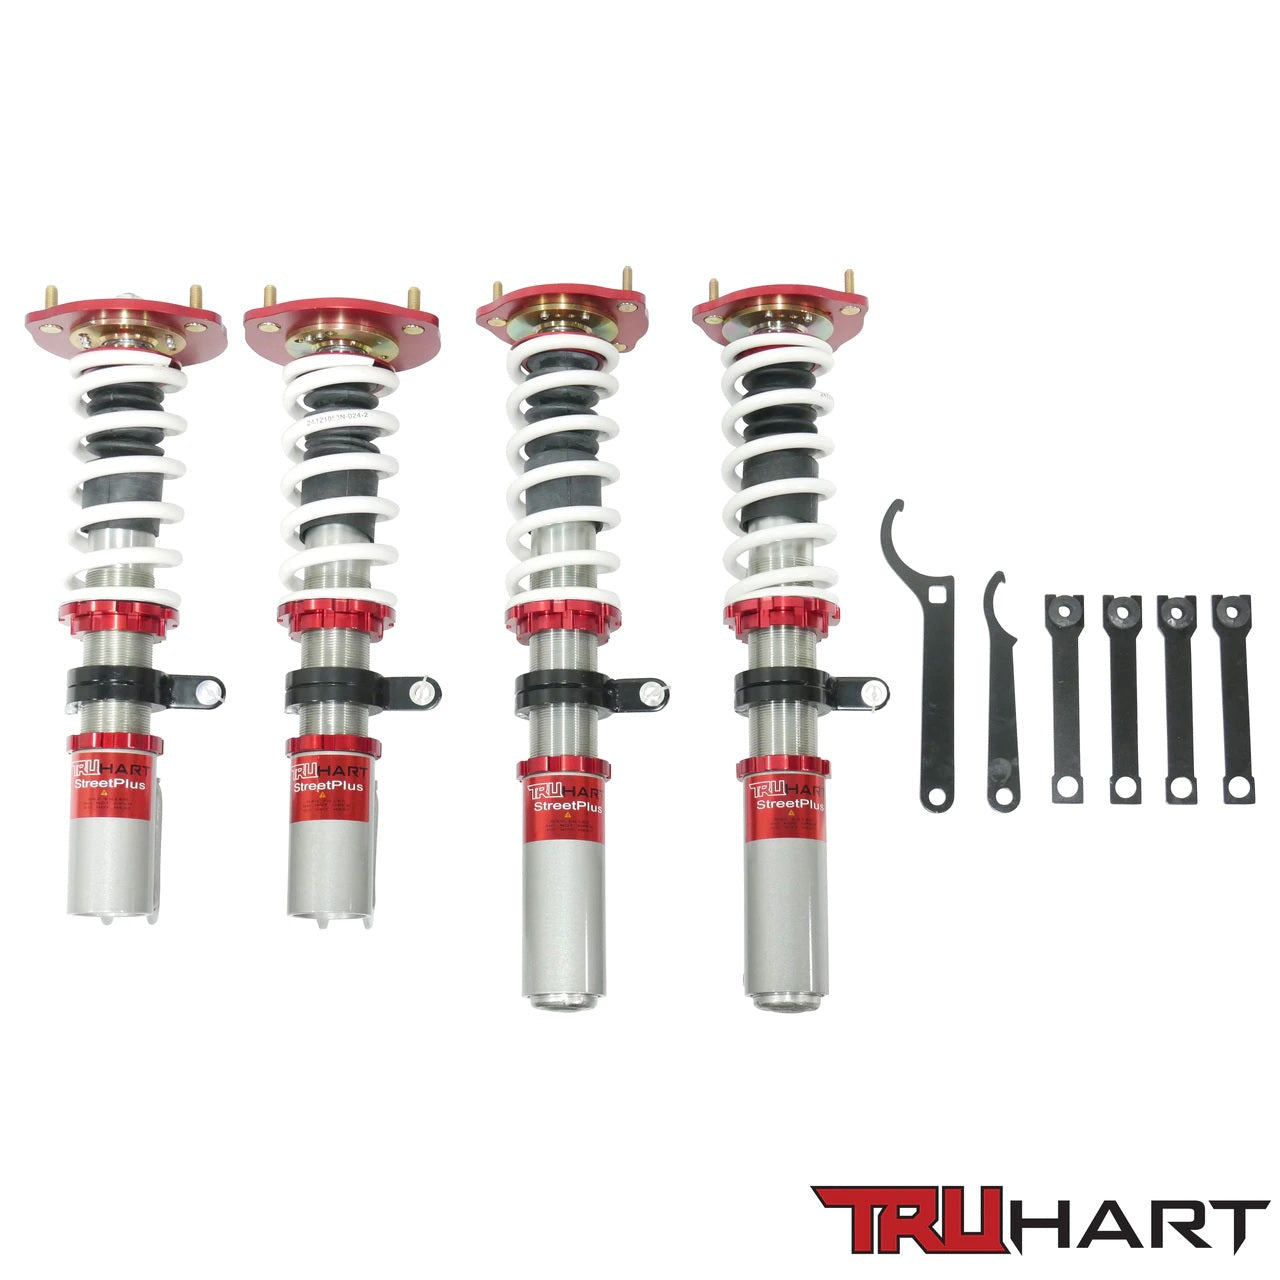 TruHart StreetPlus Coilovers (TH-T807) for Lexus ES / Toyota Camry 2002-2011